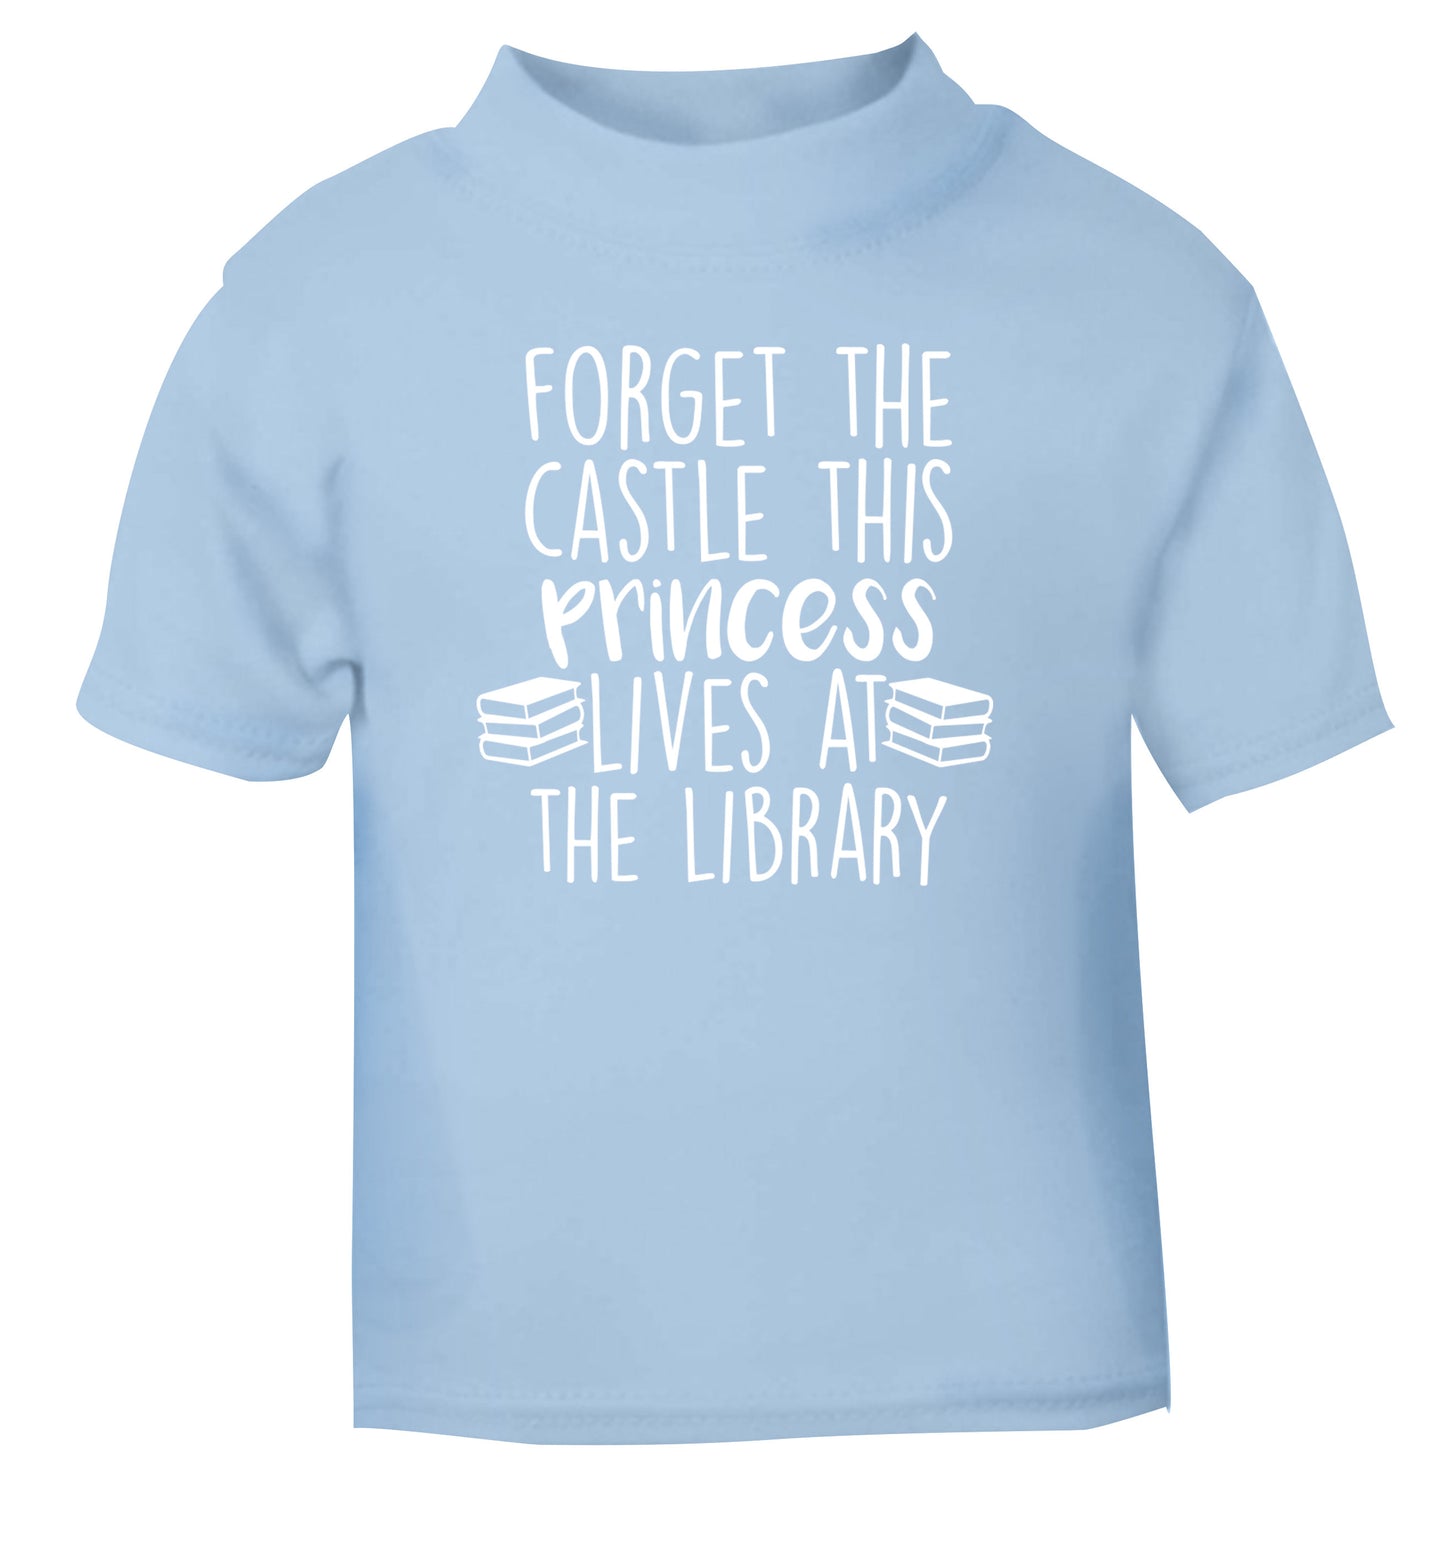 Forget the castle this princess lives at the library light blue Baby Toddler Tshirt 2 Years